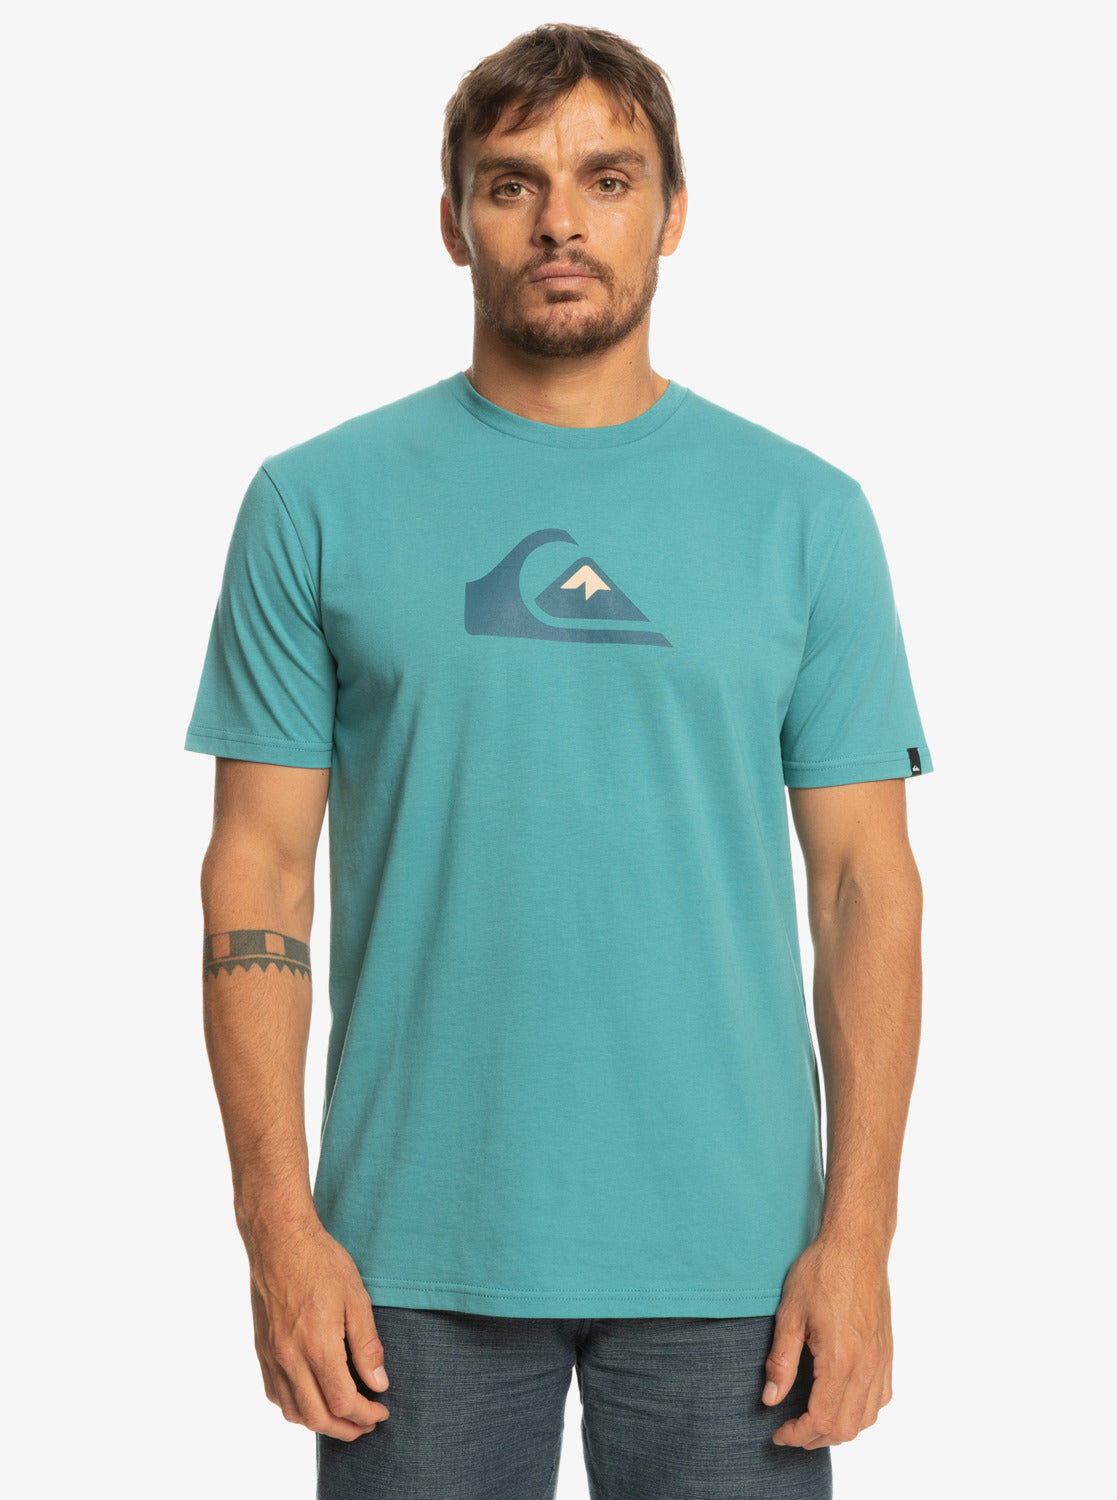 Quiksilver Comp Logo T-Shirt in Brittany Blue